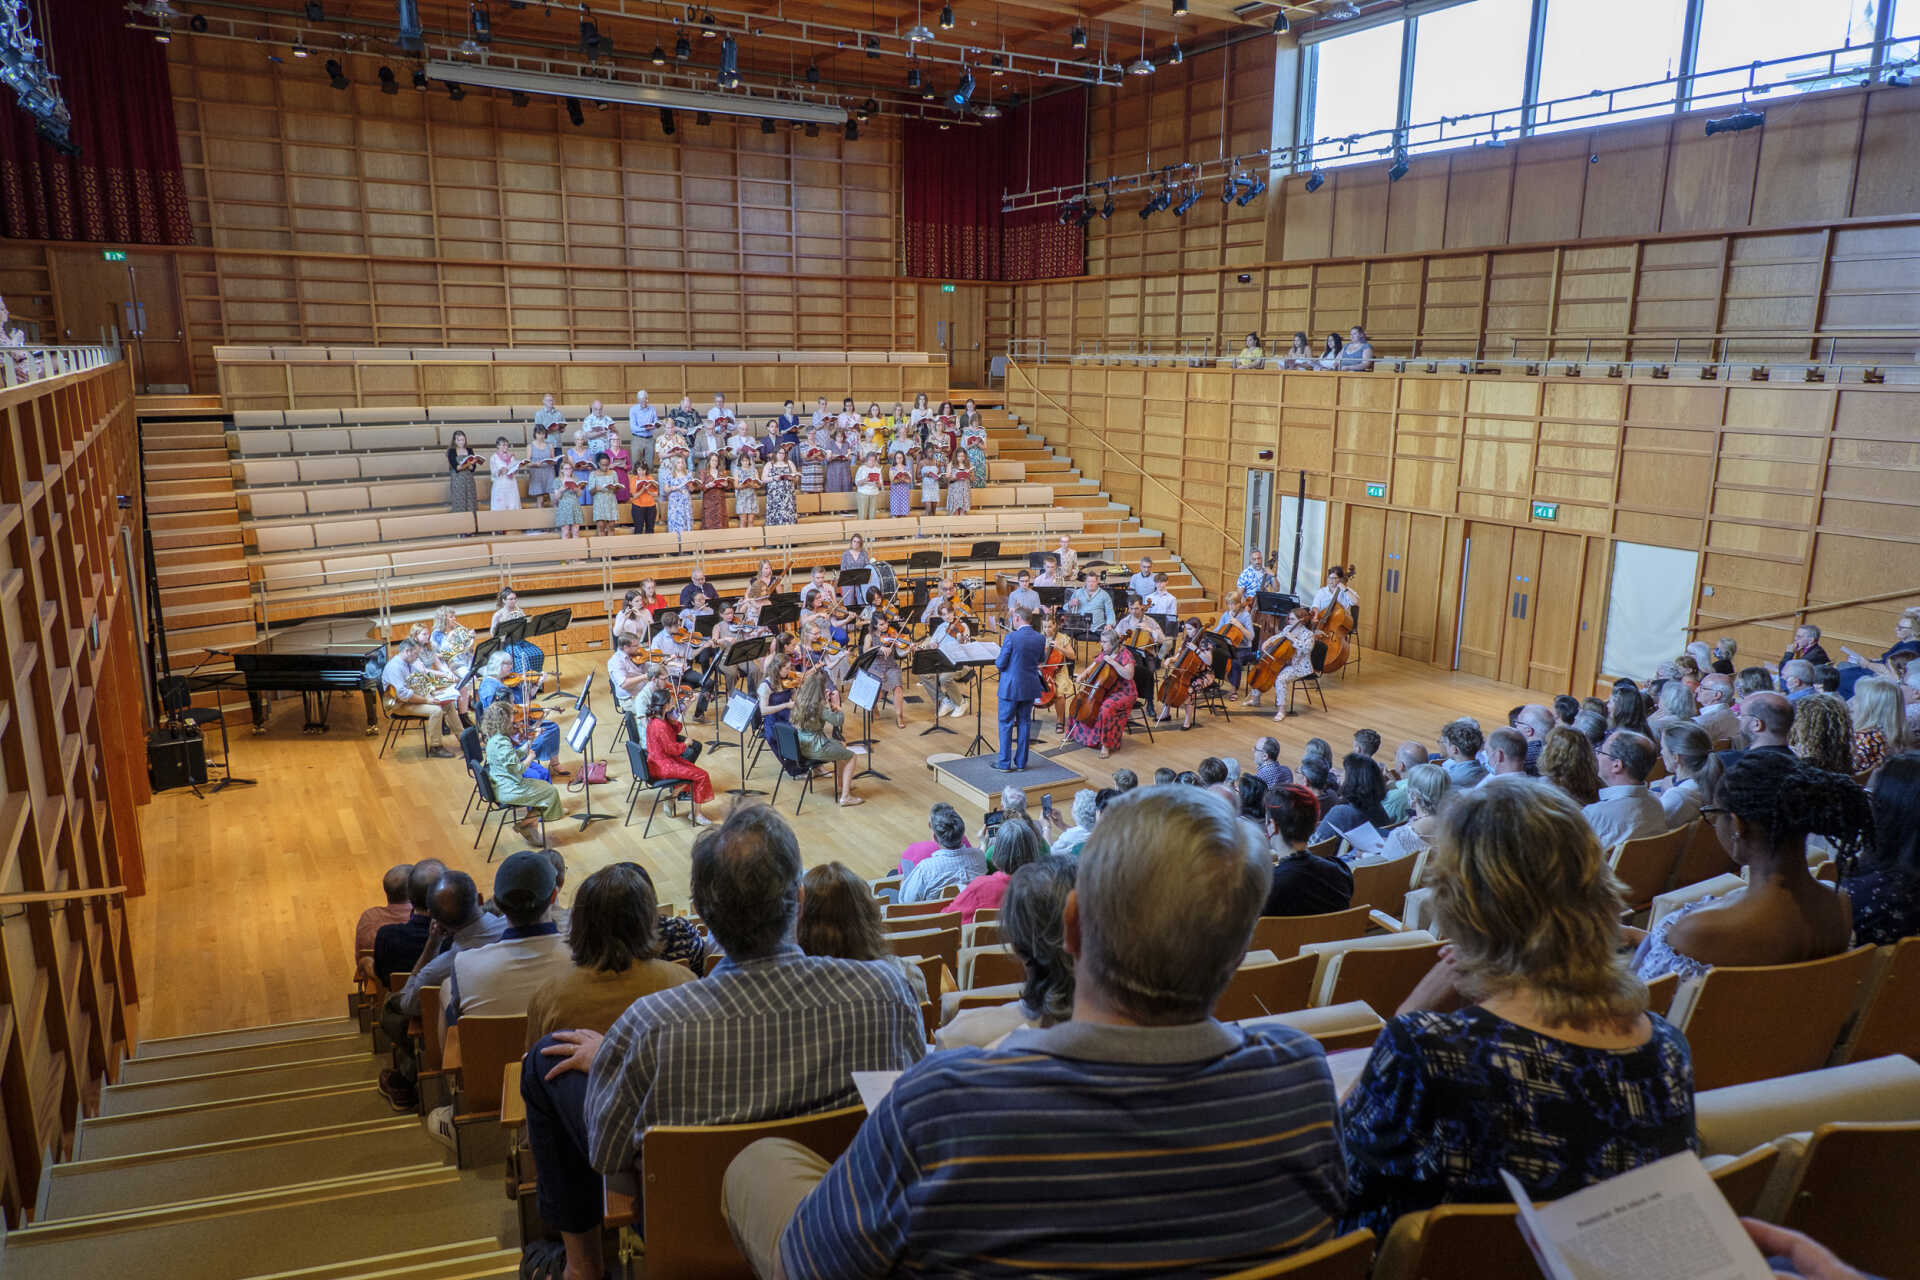 Orchestra and singers performing in front of an audience in a concert-hall